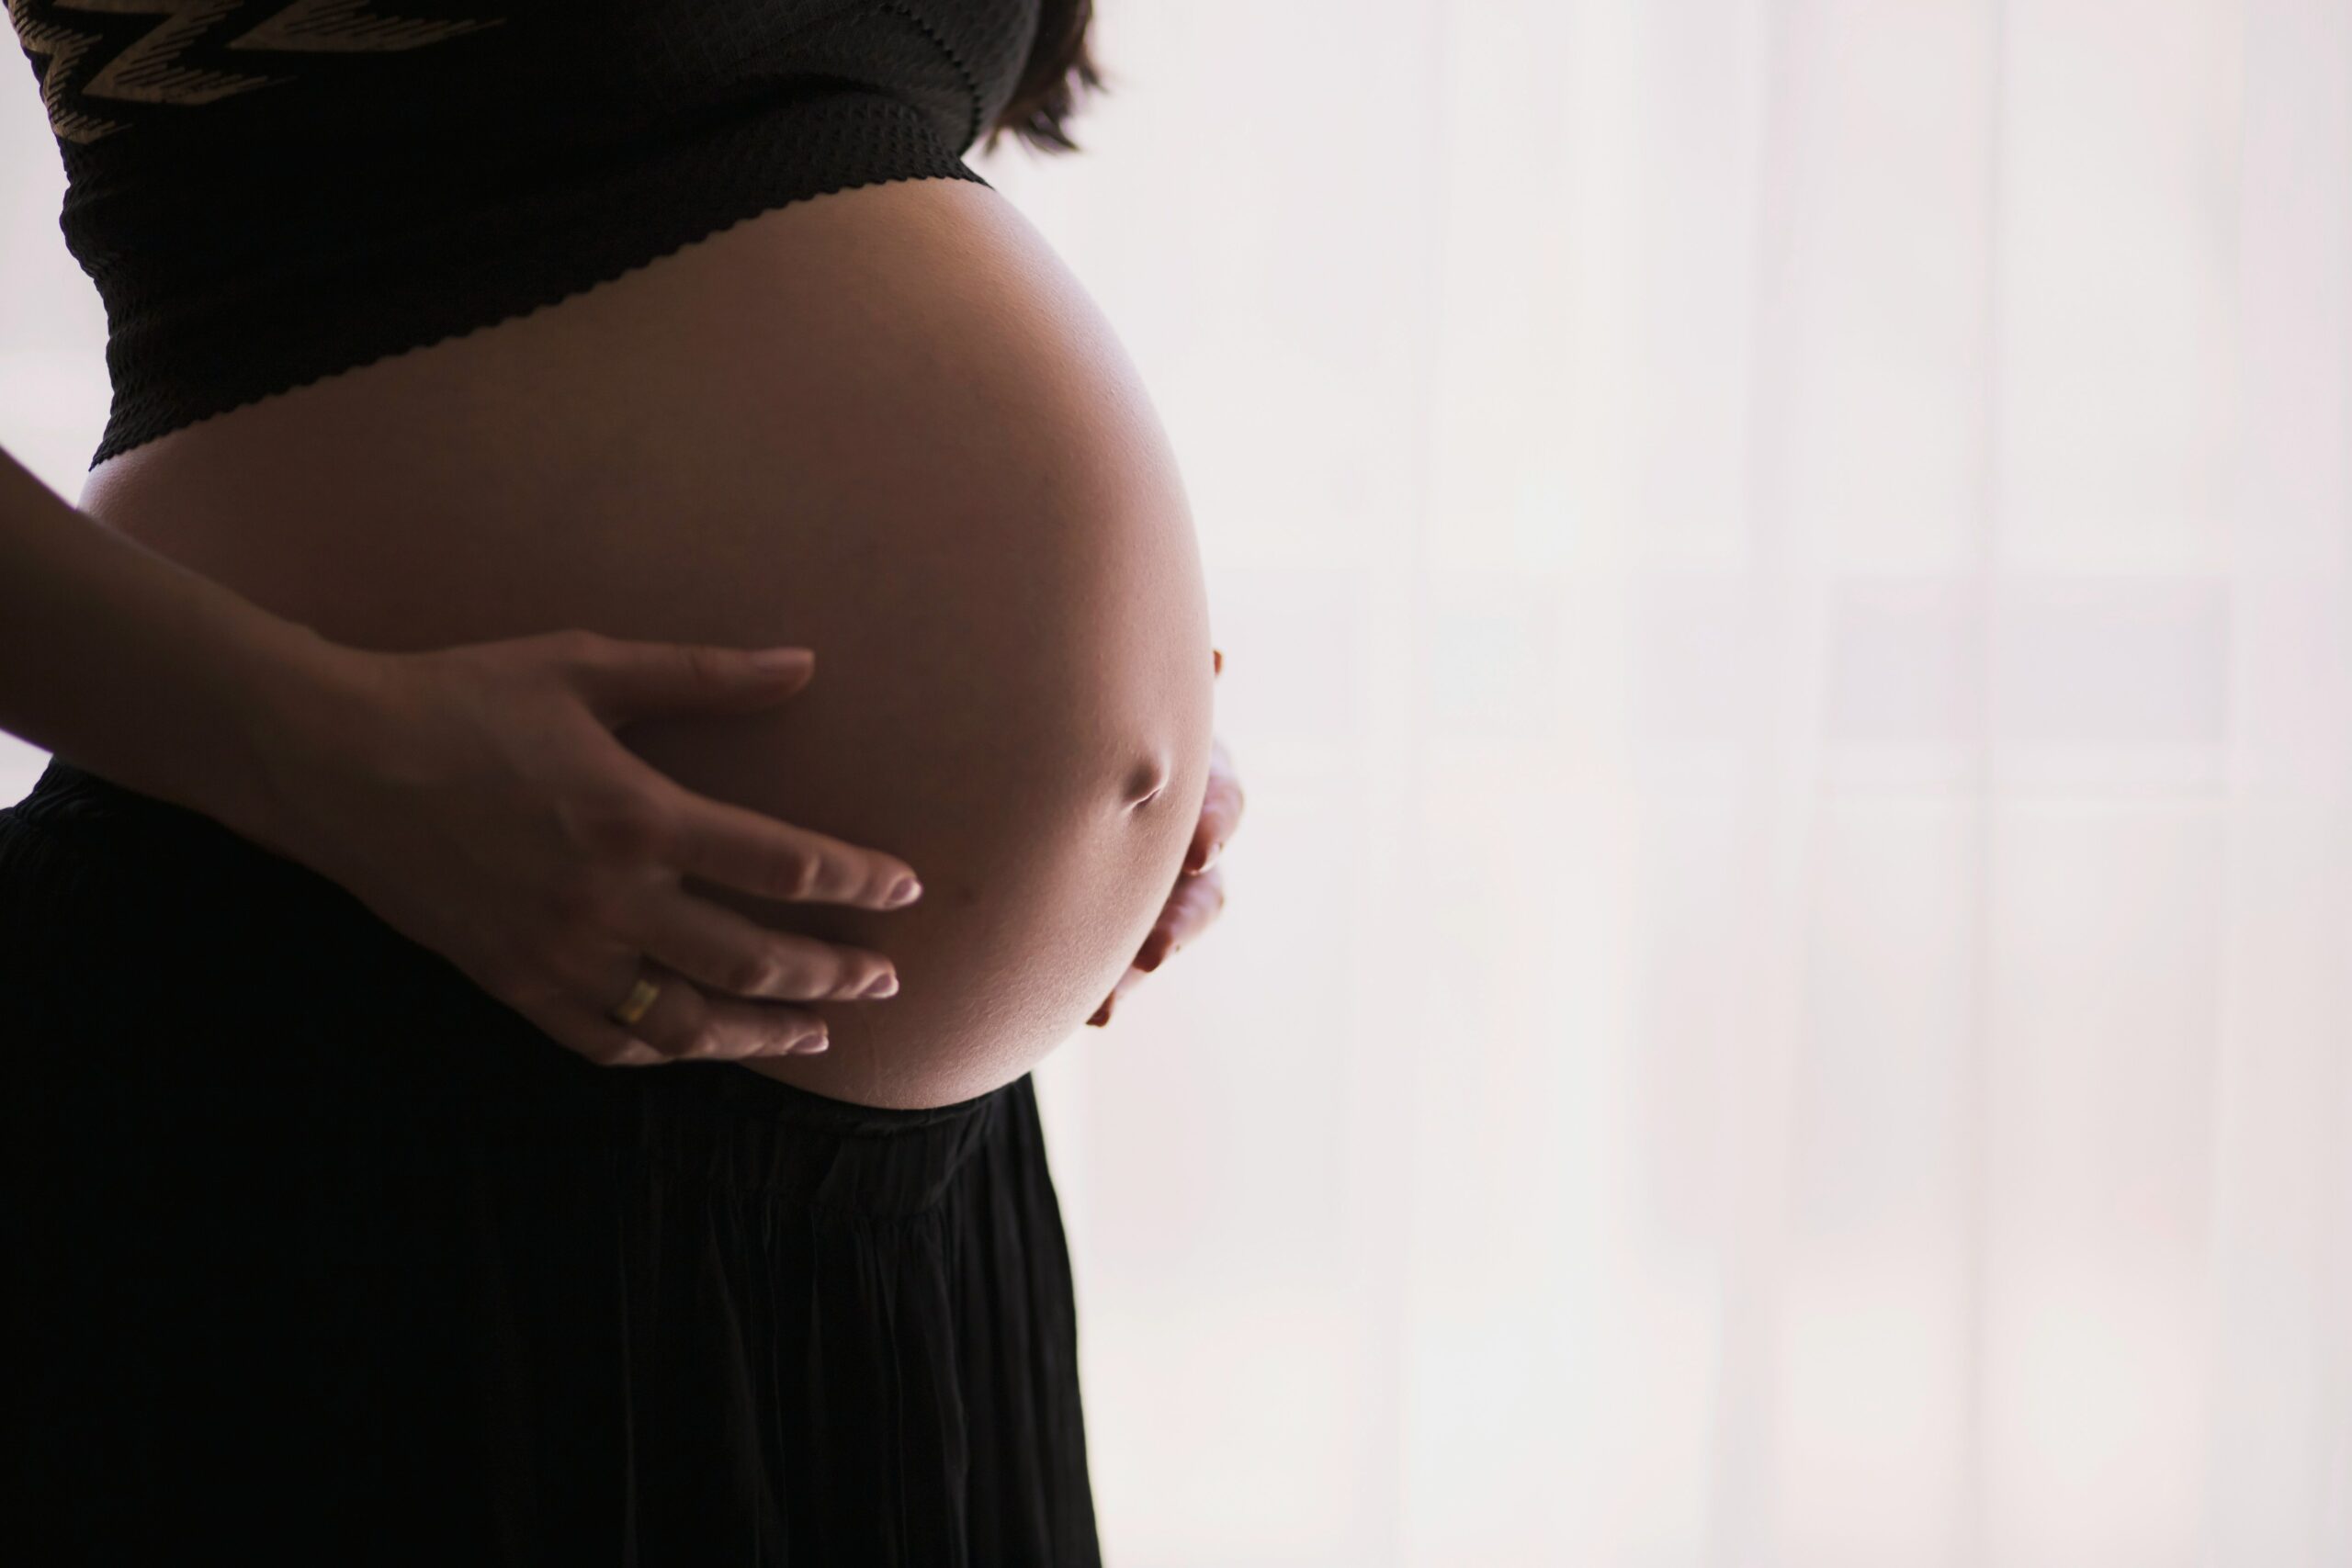 Substance use during pregnancy is a much more common issue than you'd think